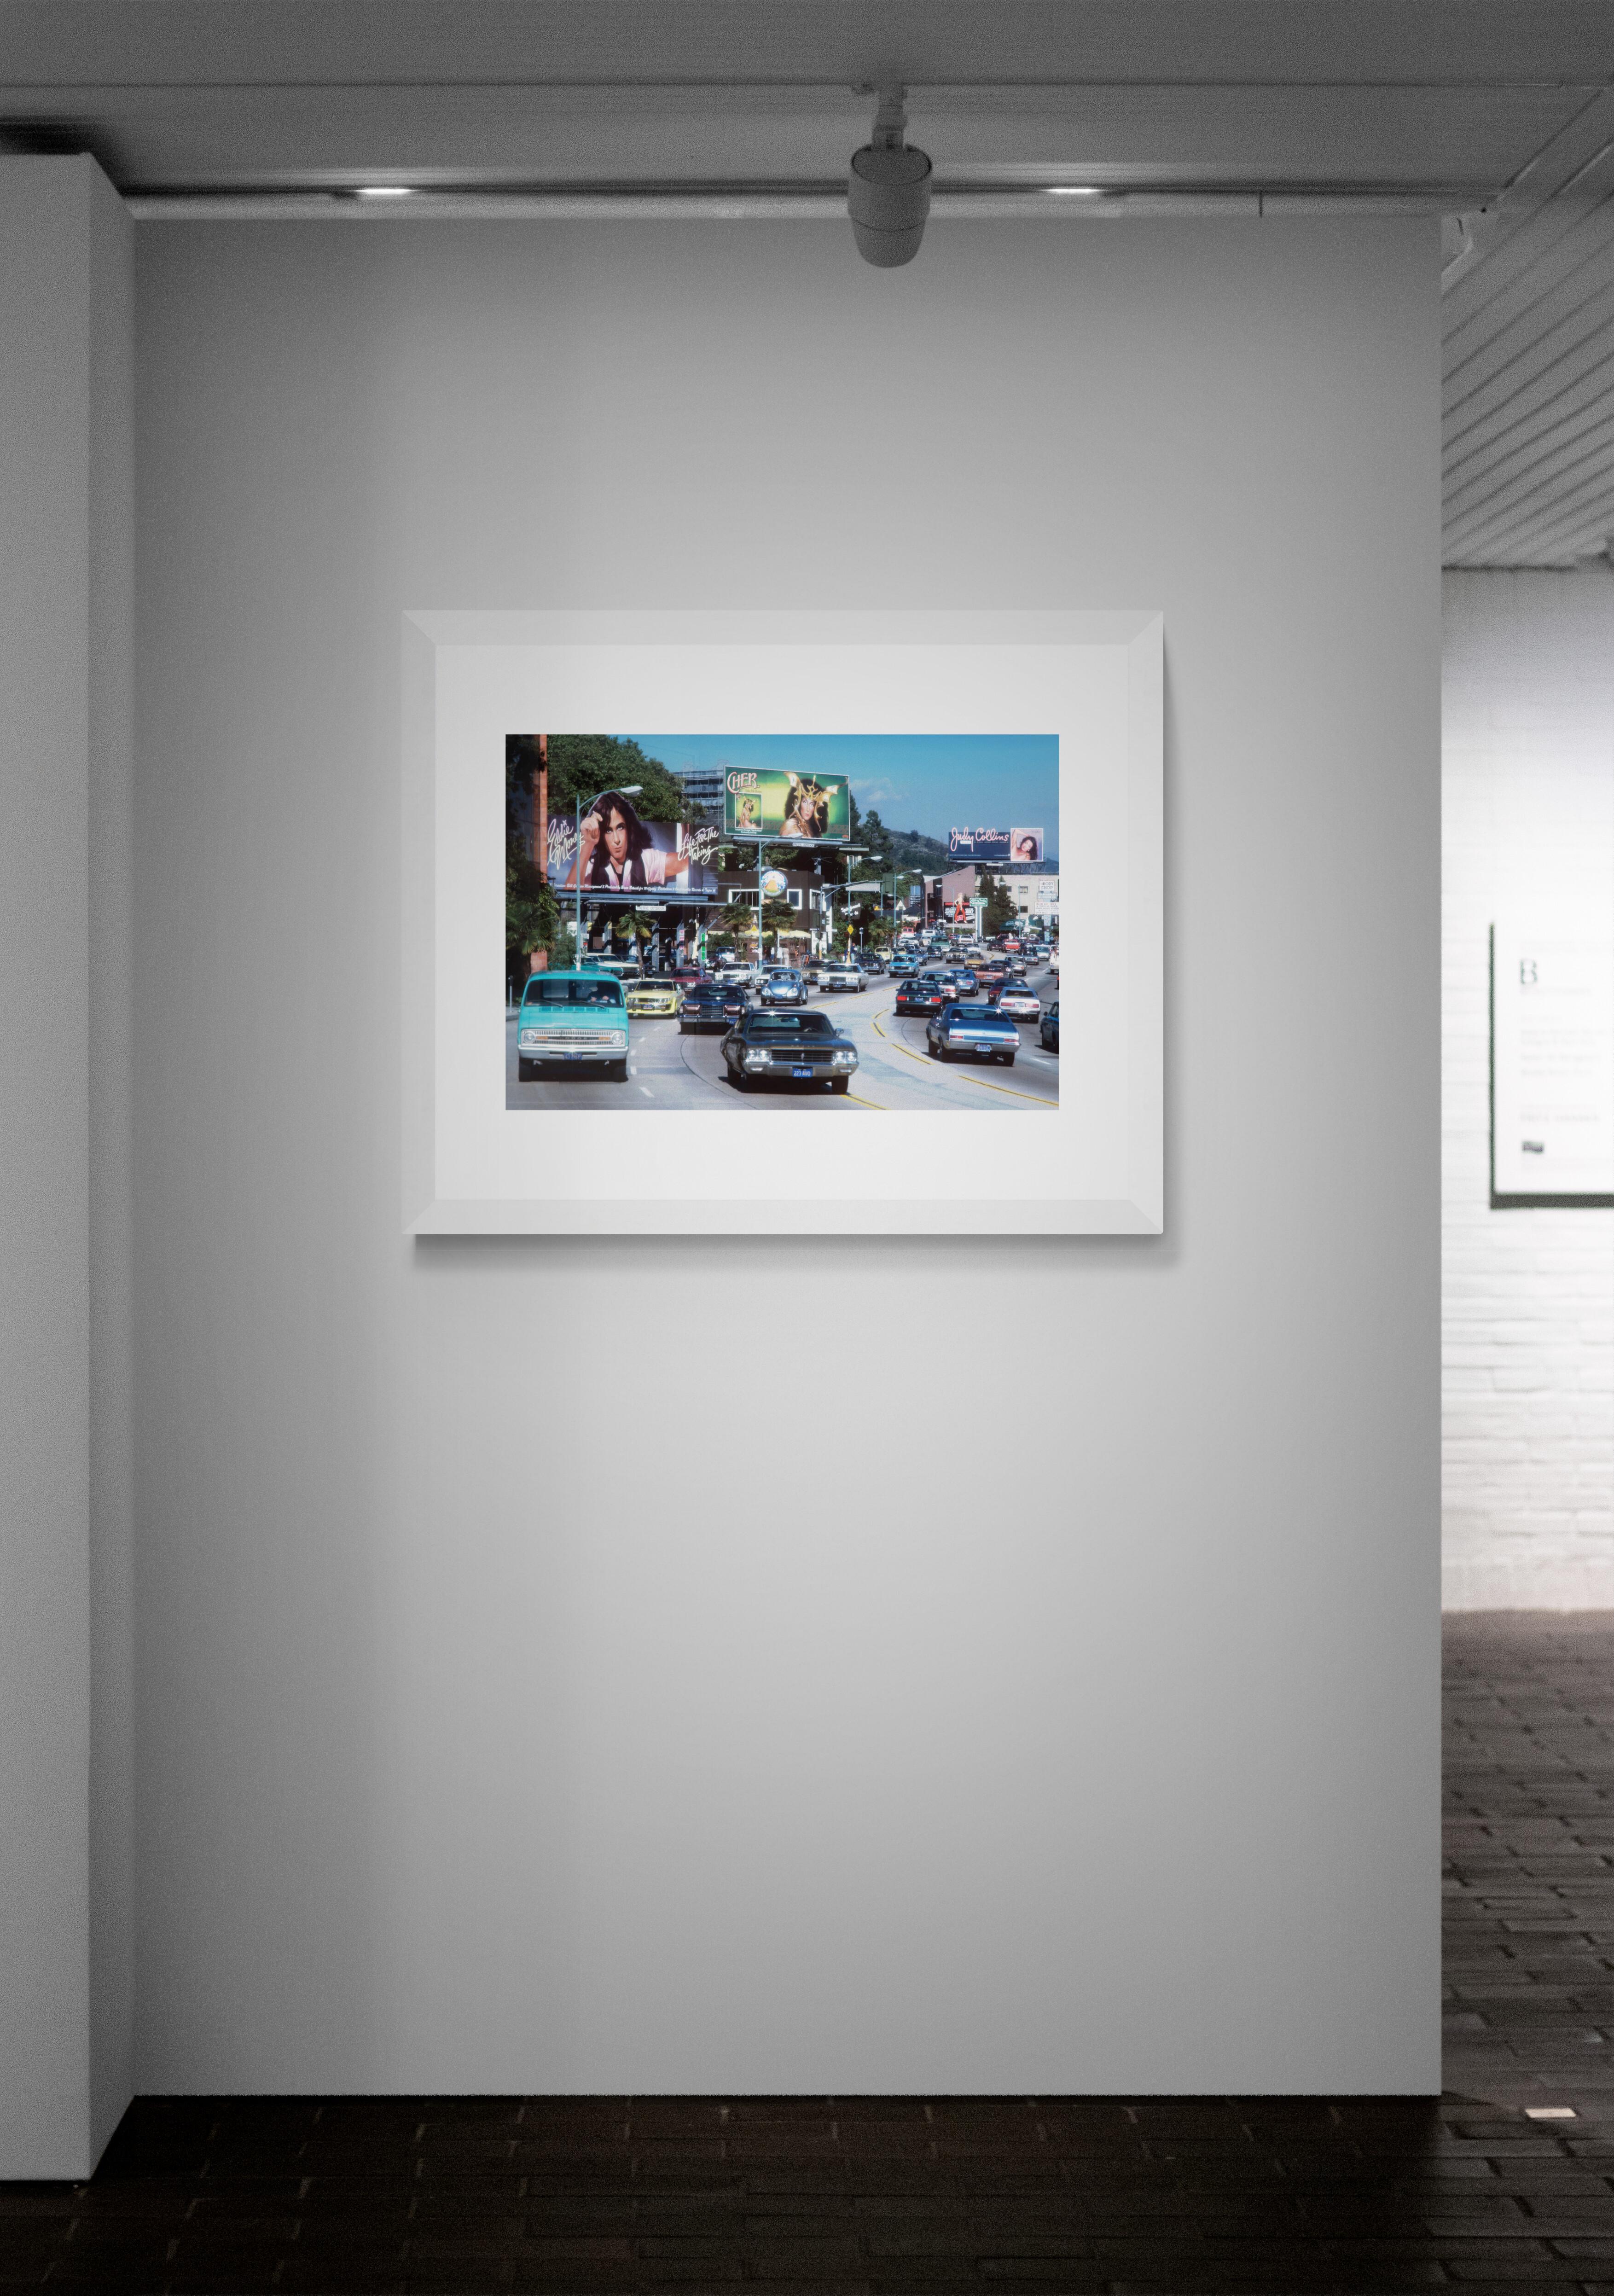 Robert Landau's urban landscape: Sunset Strip with Three Billboards; featuring Eddie Money, Cher, and Judy Collins and an unforgettable view of Sunset Boulevard in 1979.

Archival pigment print from an edition of 15, printed on 100% cotton fine art